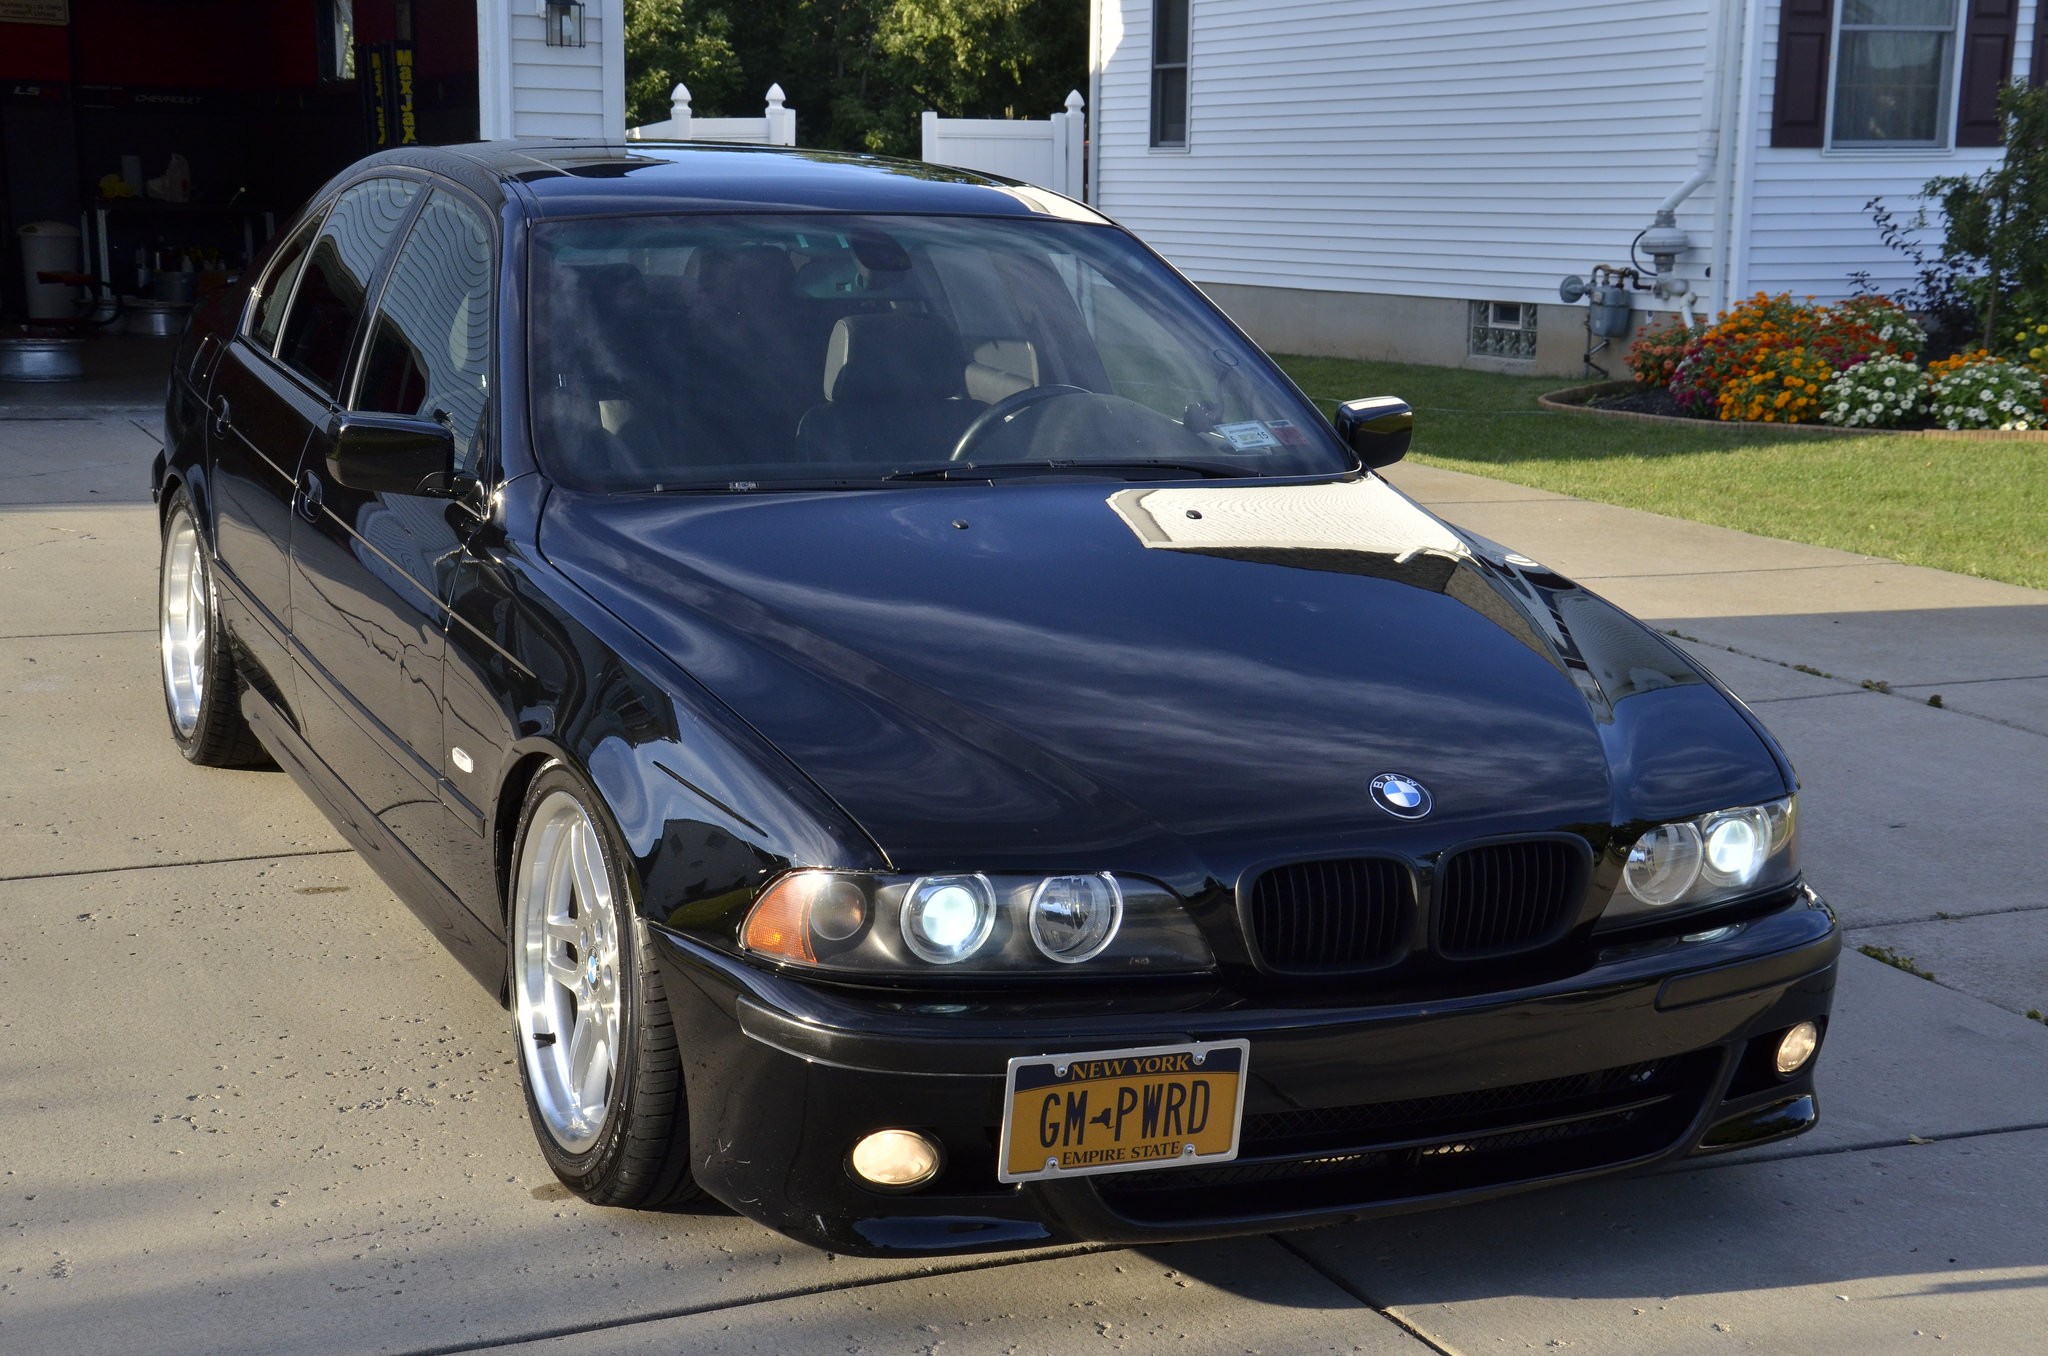 18,500 BMW E39 560i Is Tempting but Dangerously Cheap at